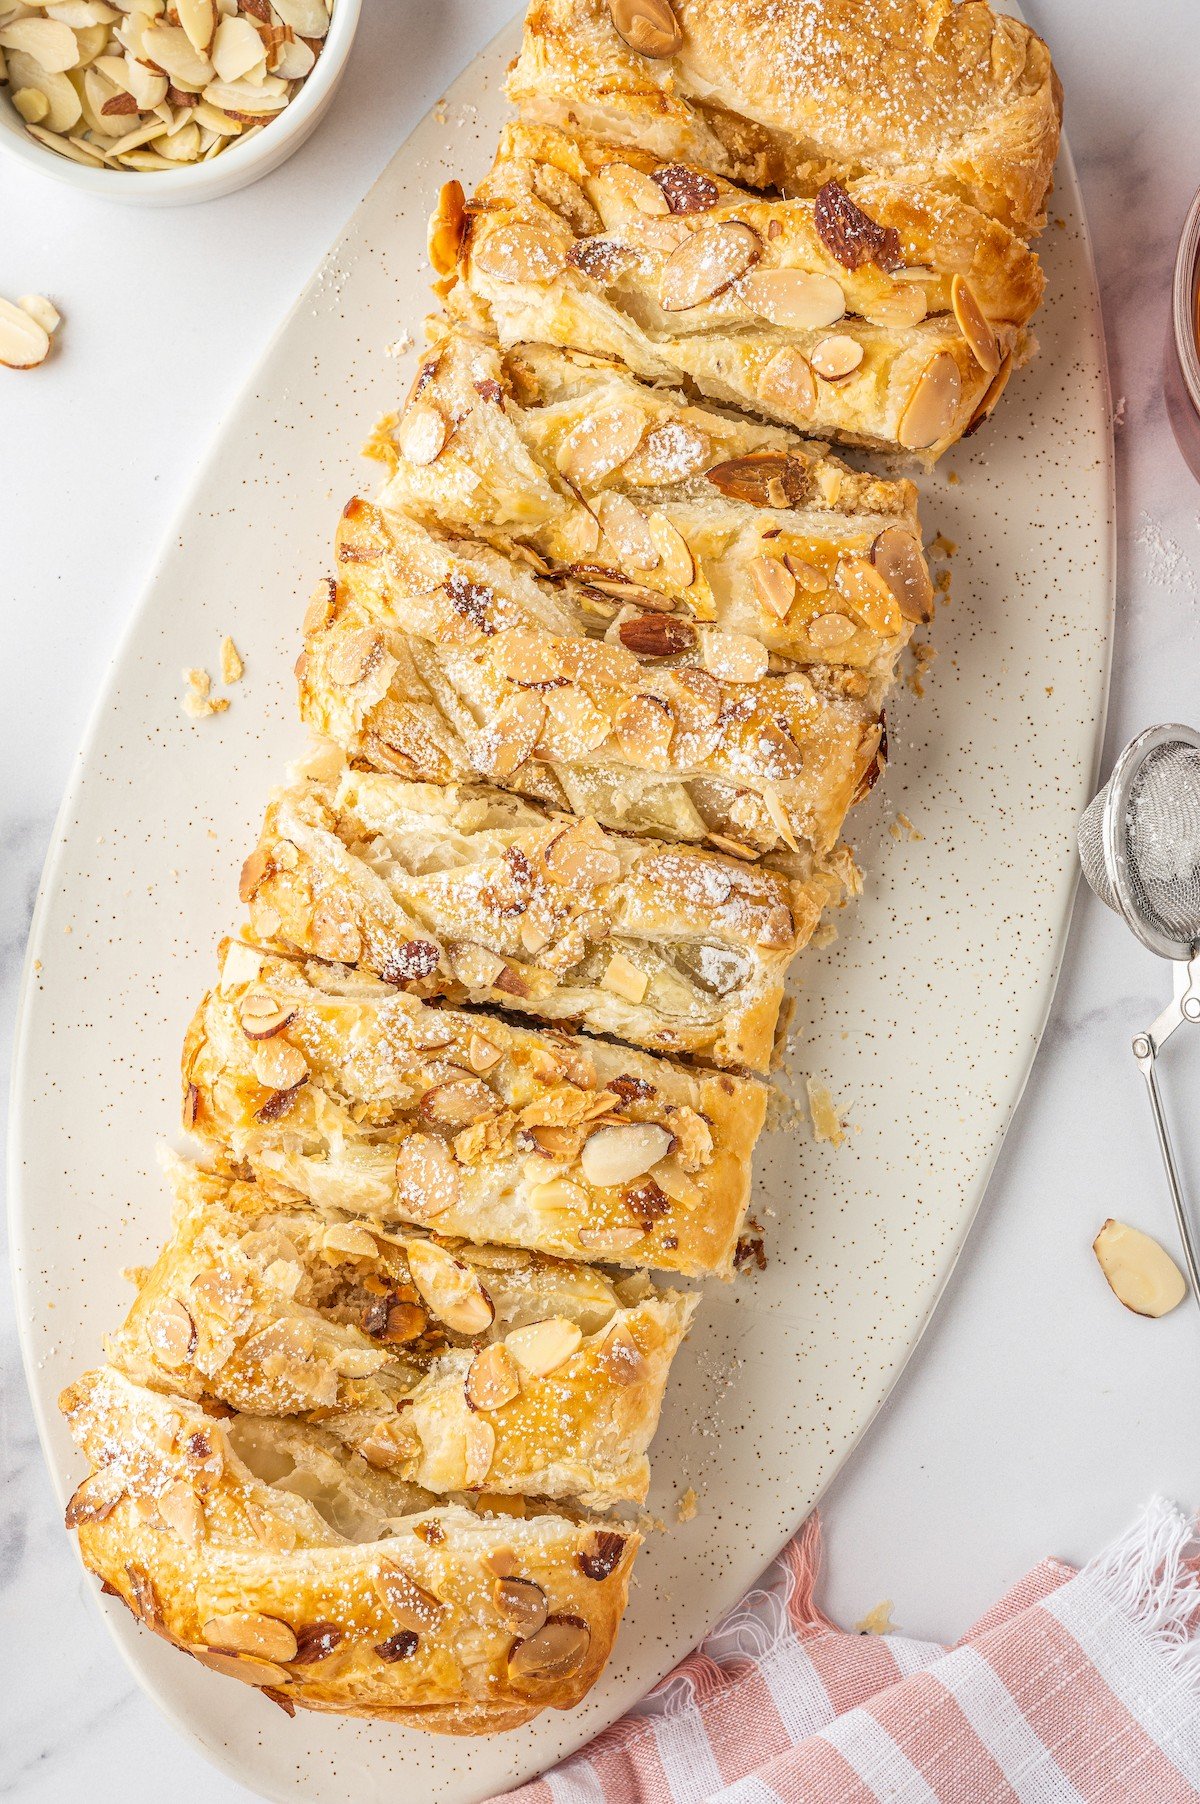 A braided pastry topped with sliced almonds.